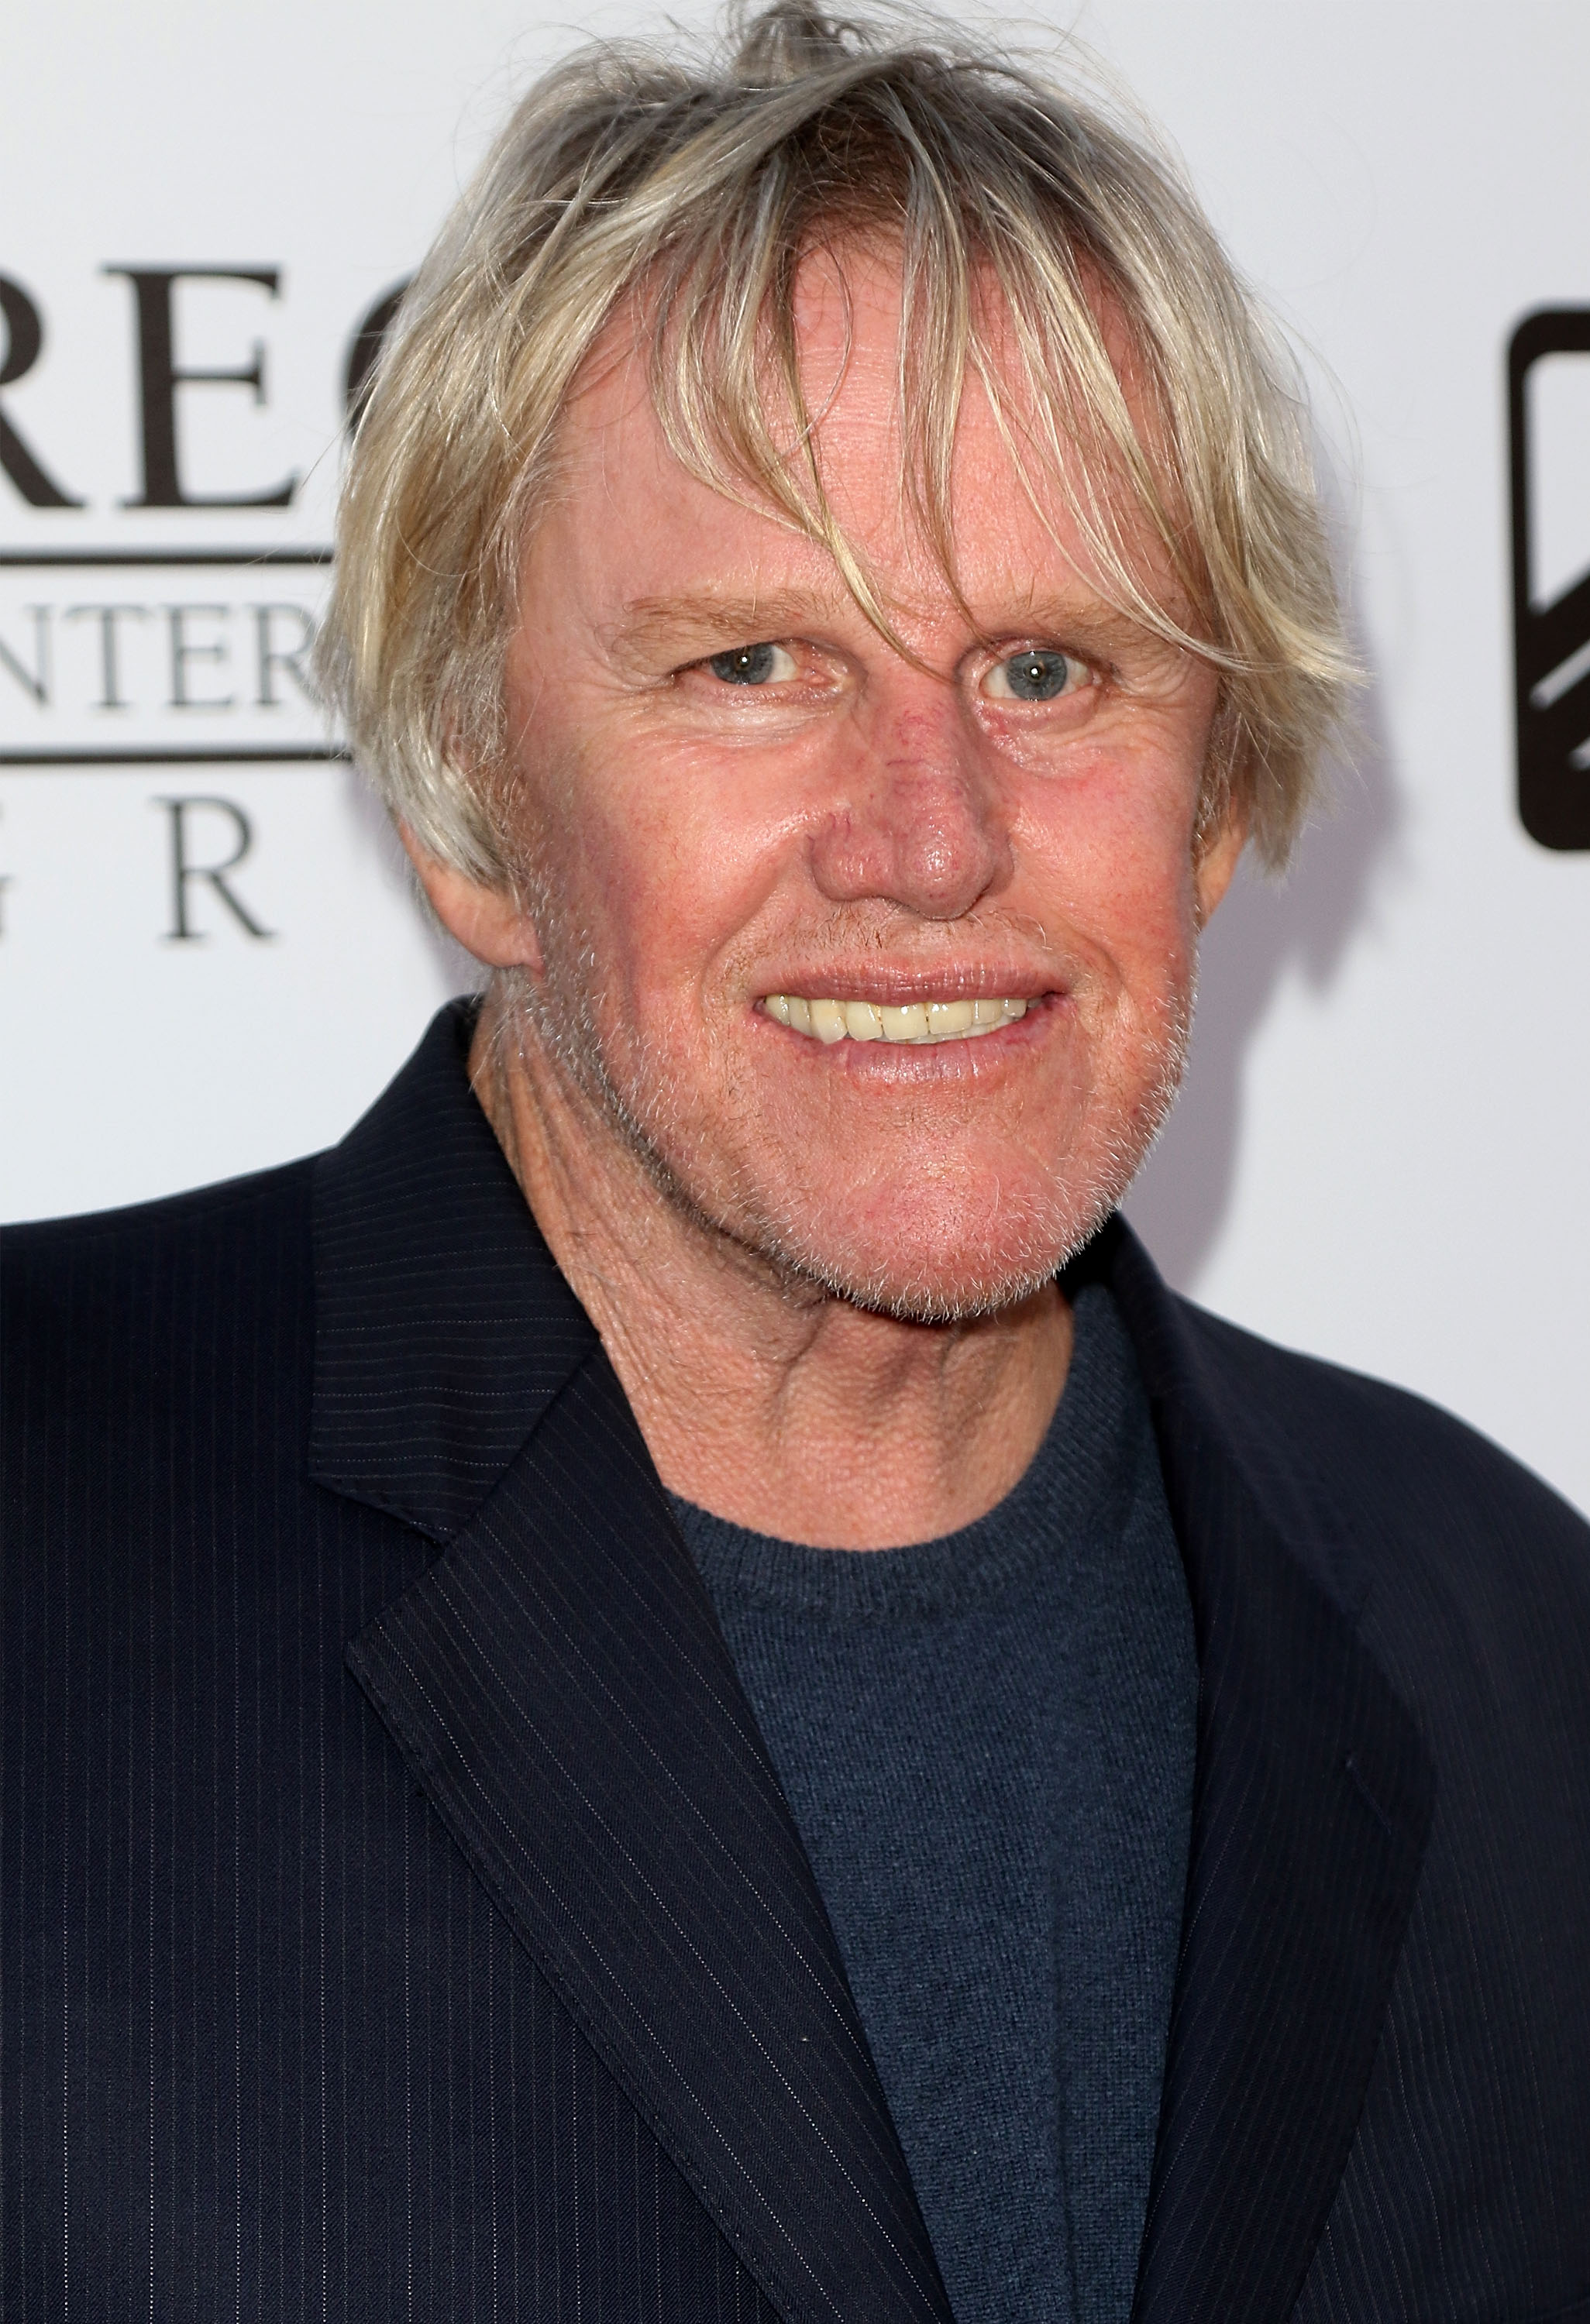 Gary Busey attends the 5th Annual Variety "The Children's Charity of SoCal Texas Hold 'Em Poker Tournament" at Paramount Studios on July 22, 2015 in Hollywood, California | Source: Getty Images